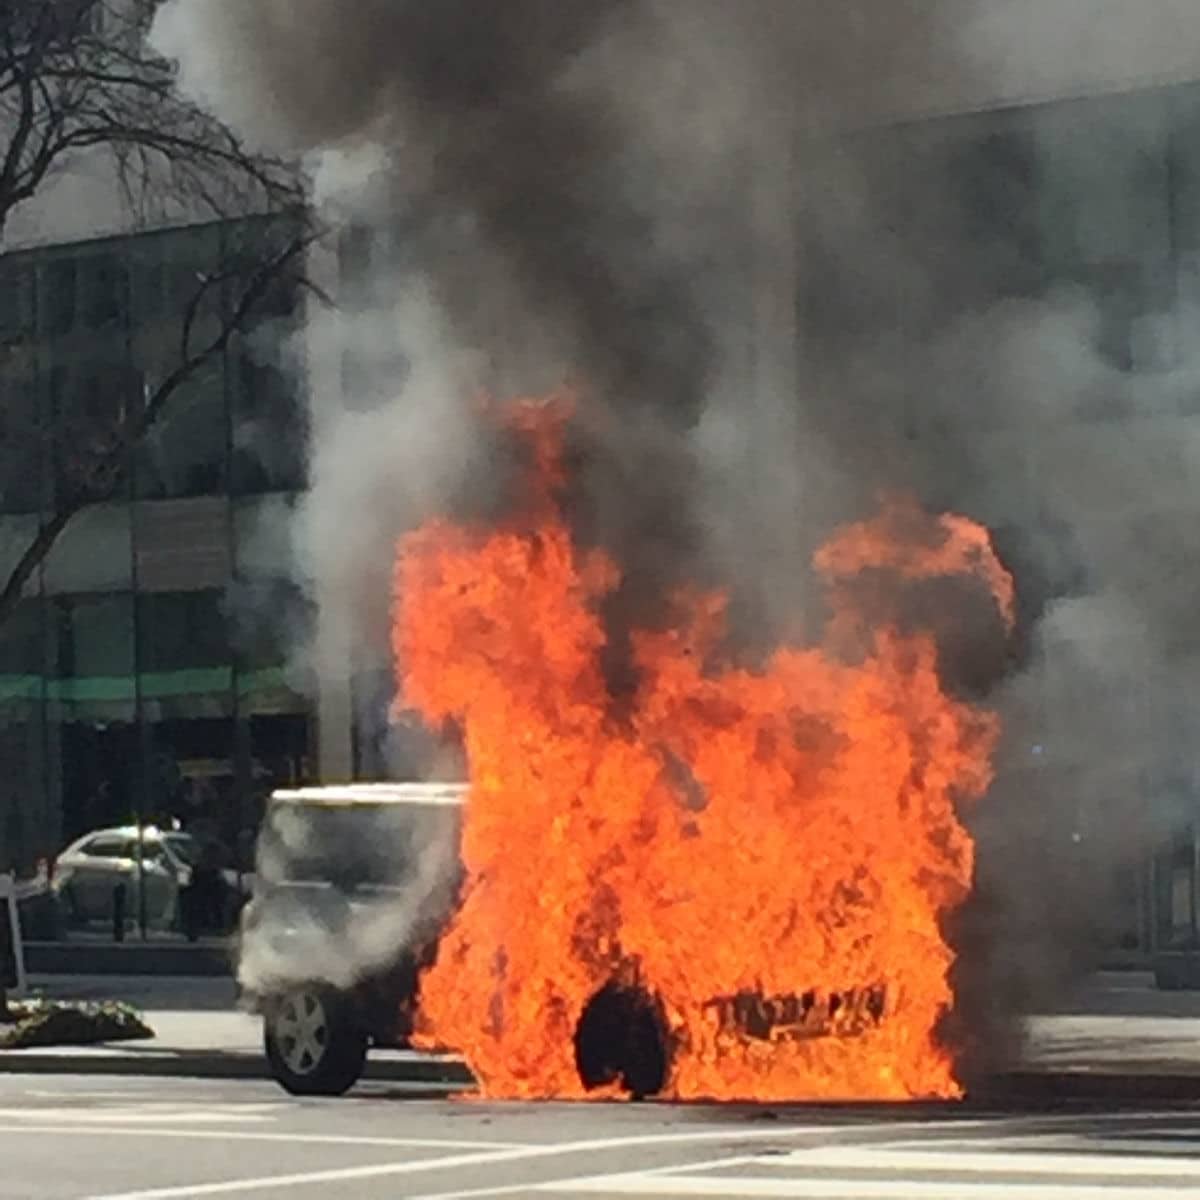 A jeep caught fire in downtown D.C. Tuesday afternoon. (Courtesy Suzanne Raven)